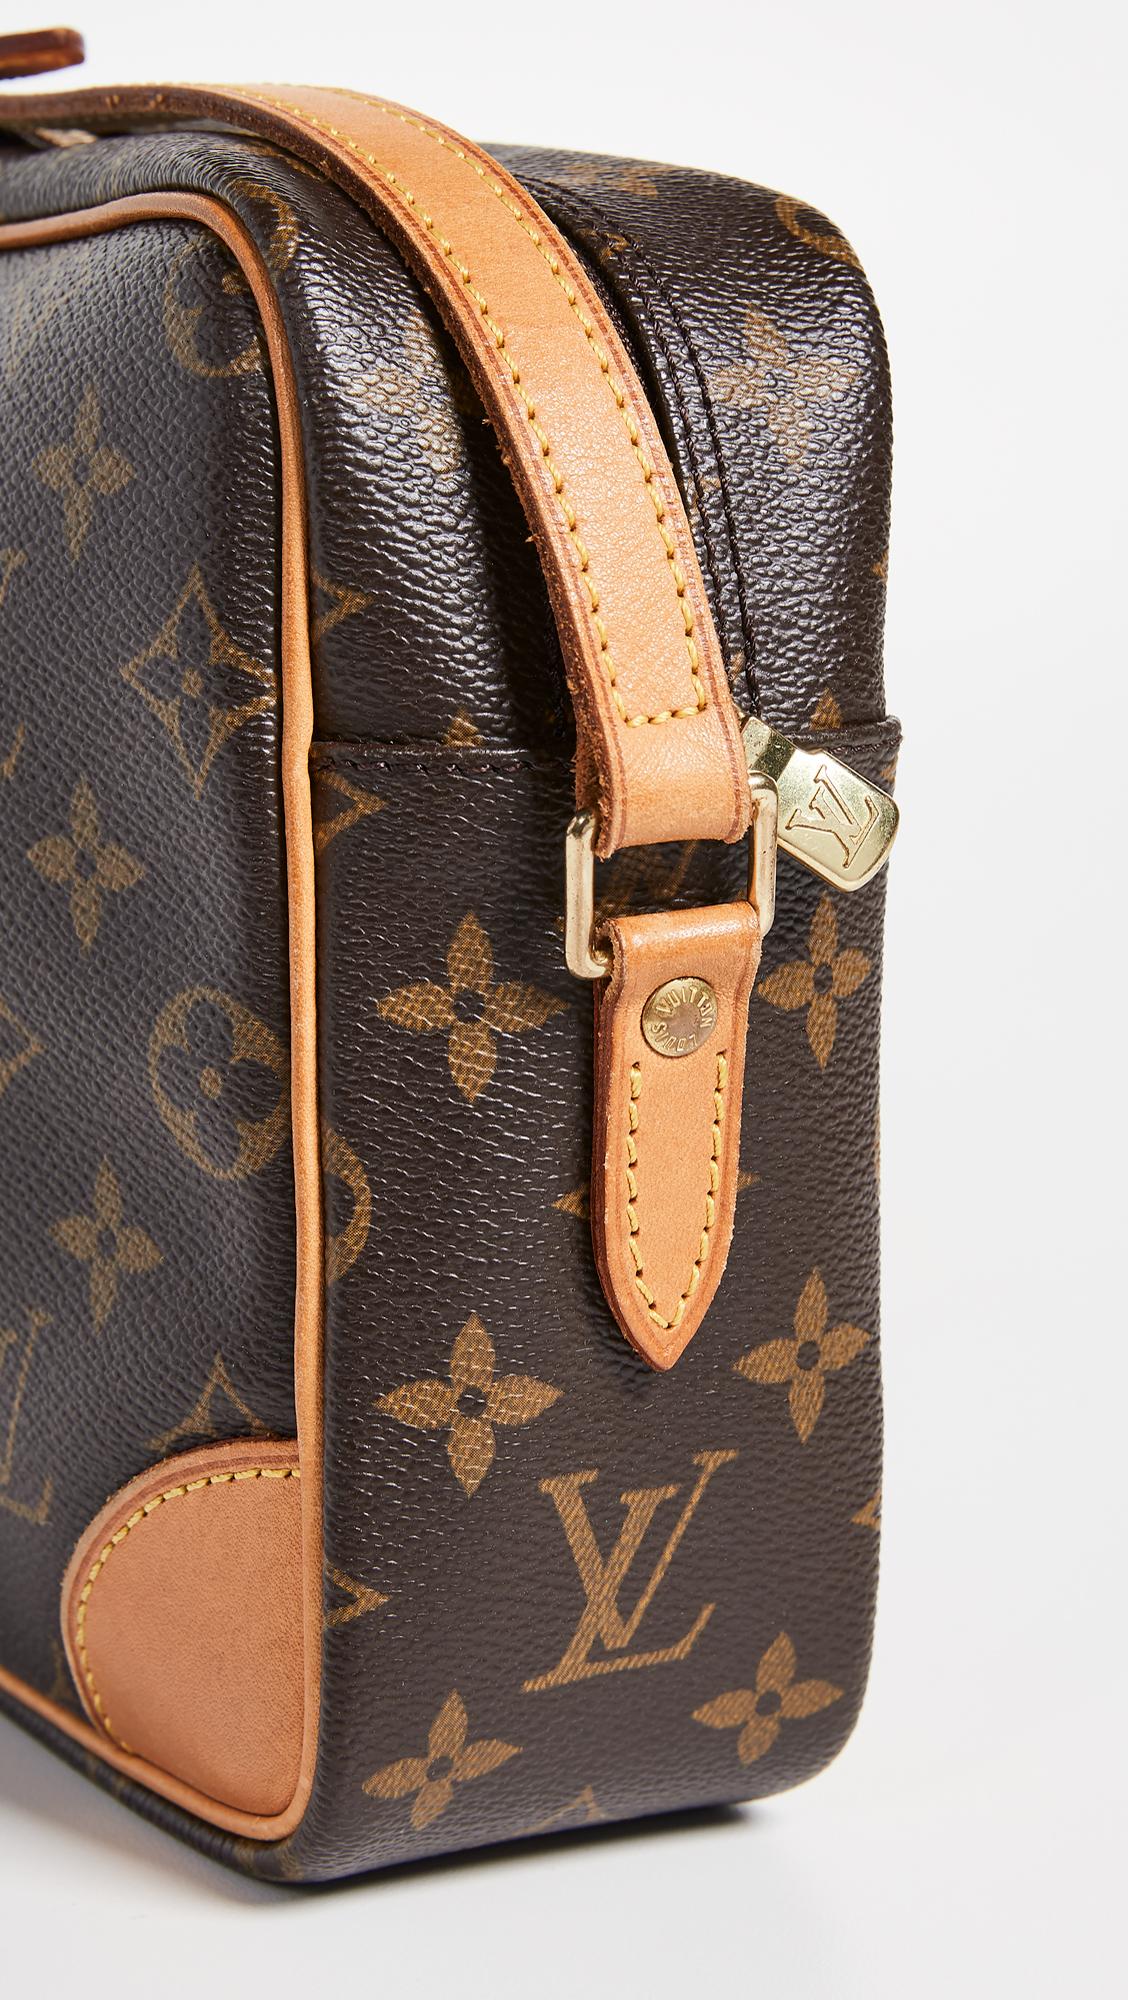 Lyst - What Goes Around Comes Around Lv Monogram Trocadero 27 Bag in Brown